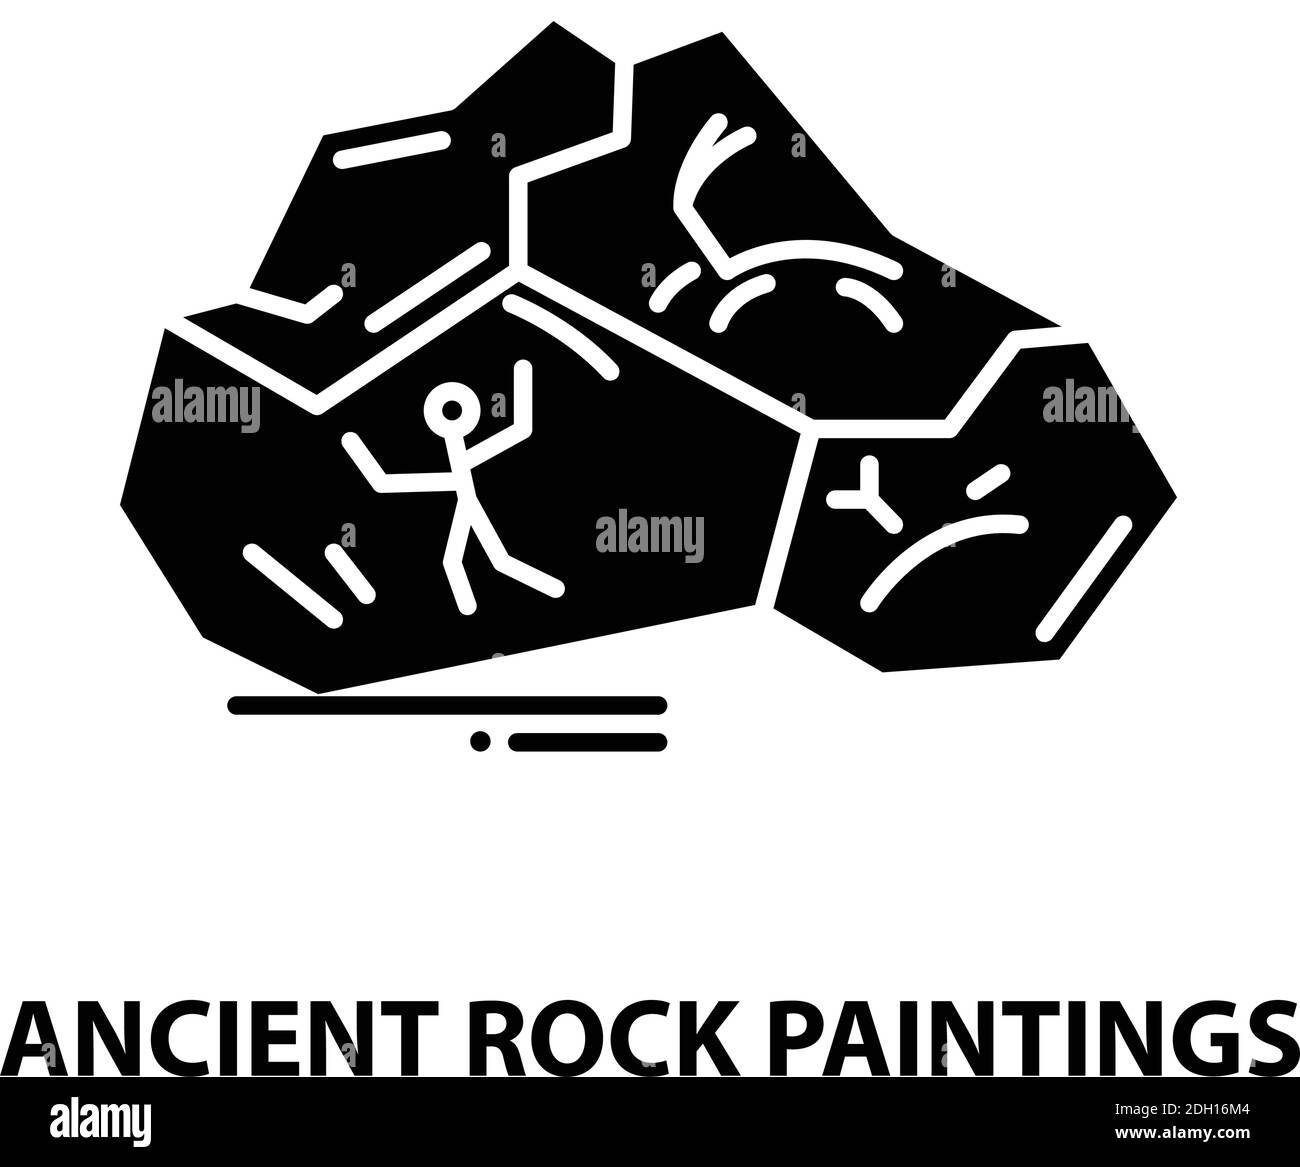 ancient rock paintings icon, black vector sign with editable strokes, concept illustration Stock Vector